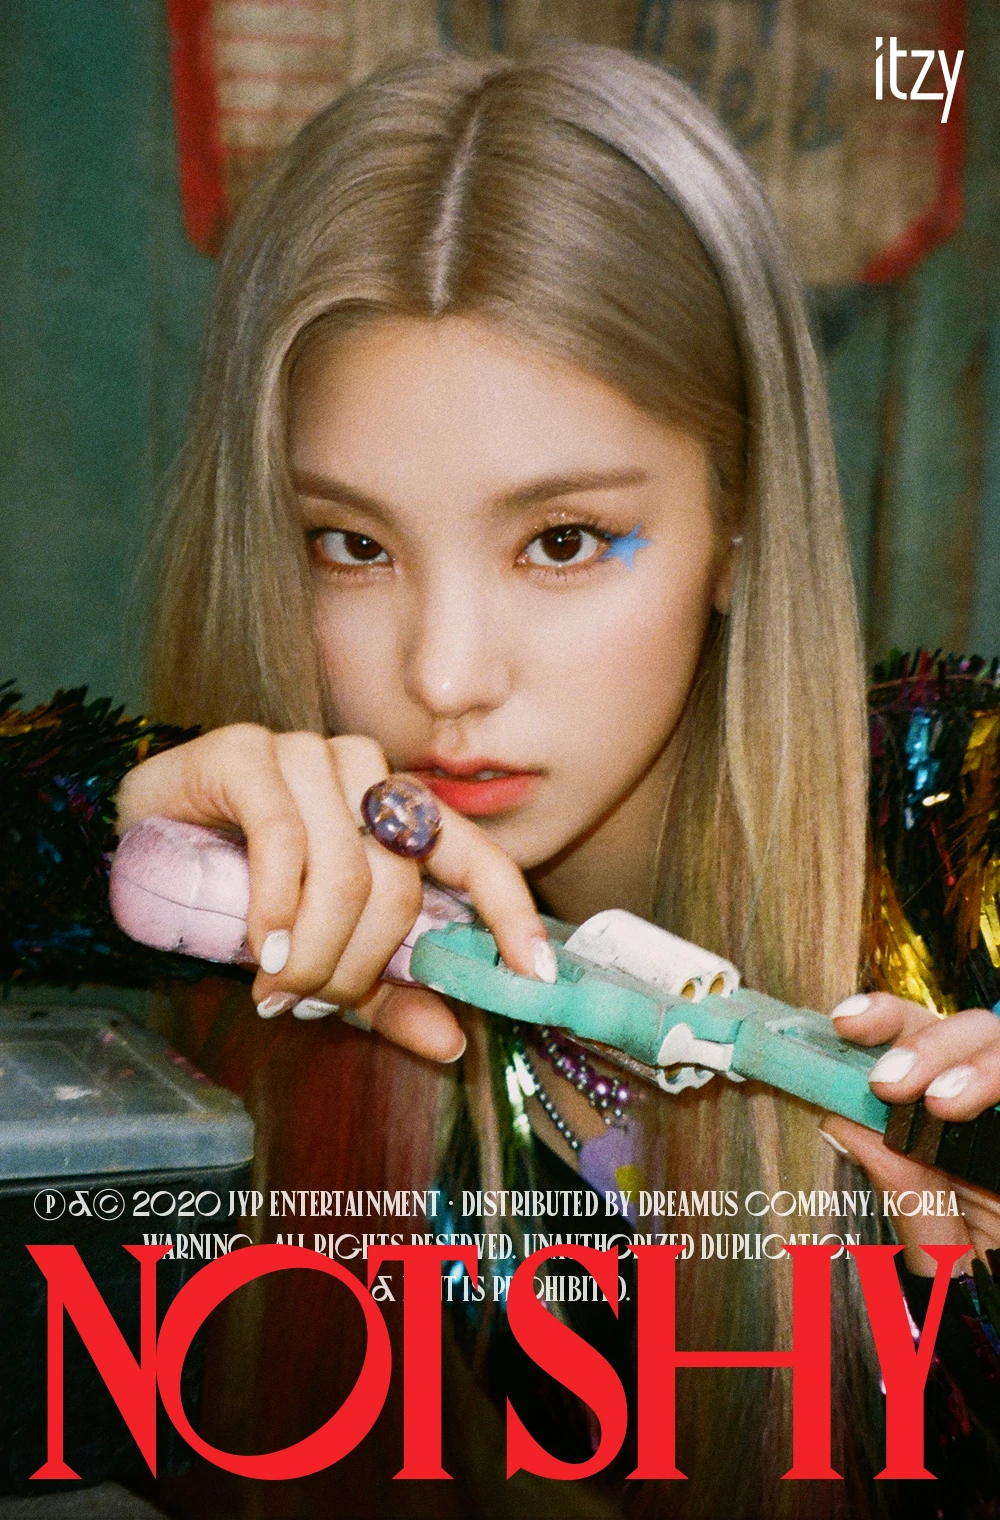 Itzy Not Shy Yeji Concept Teaser Picture Image Photo Kpop K-Concept 2